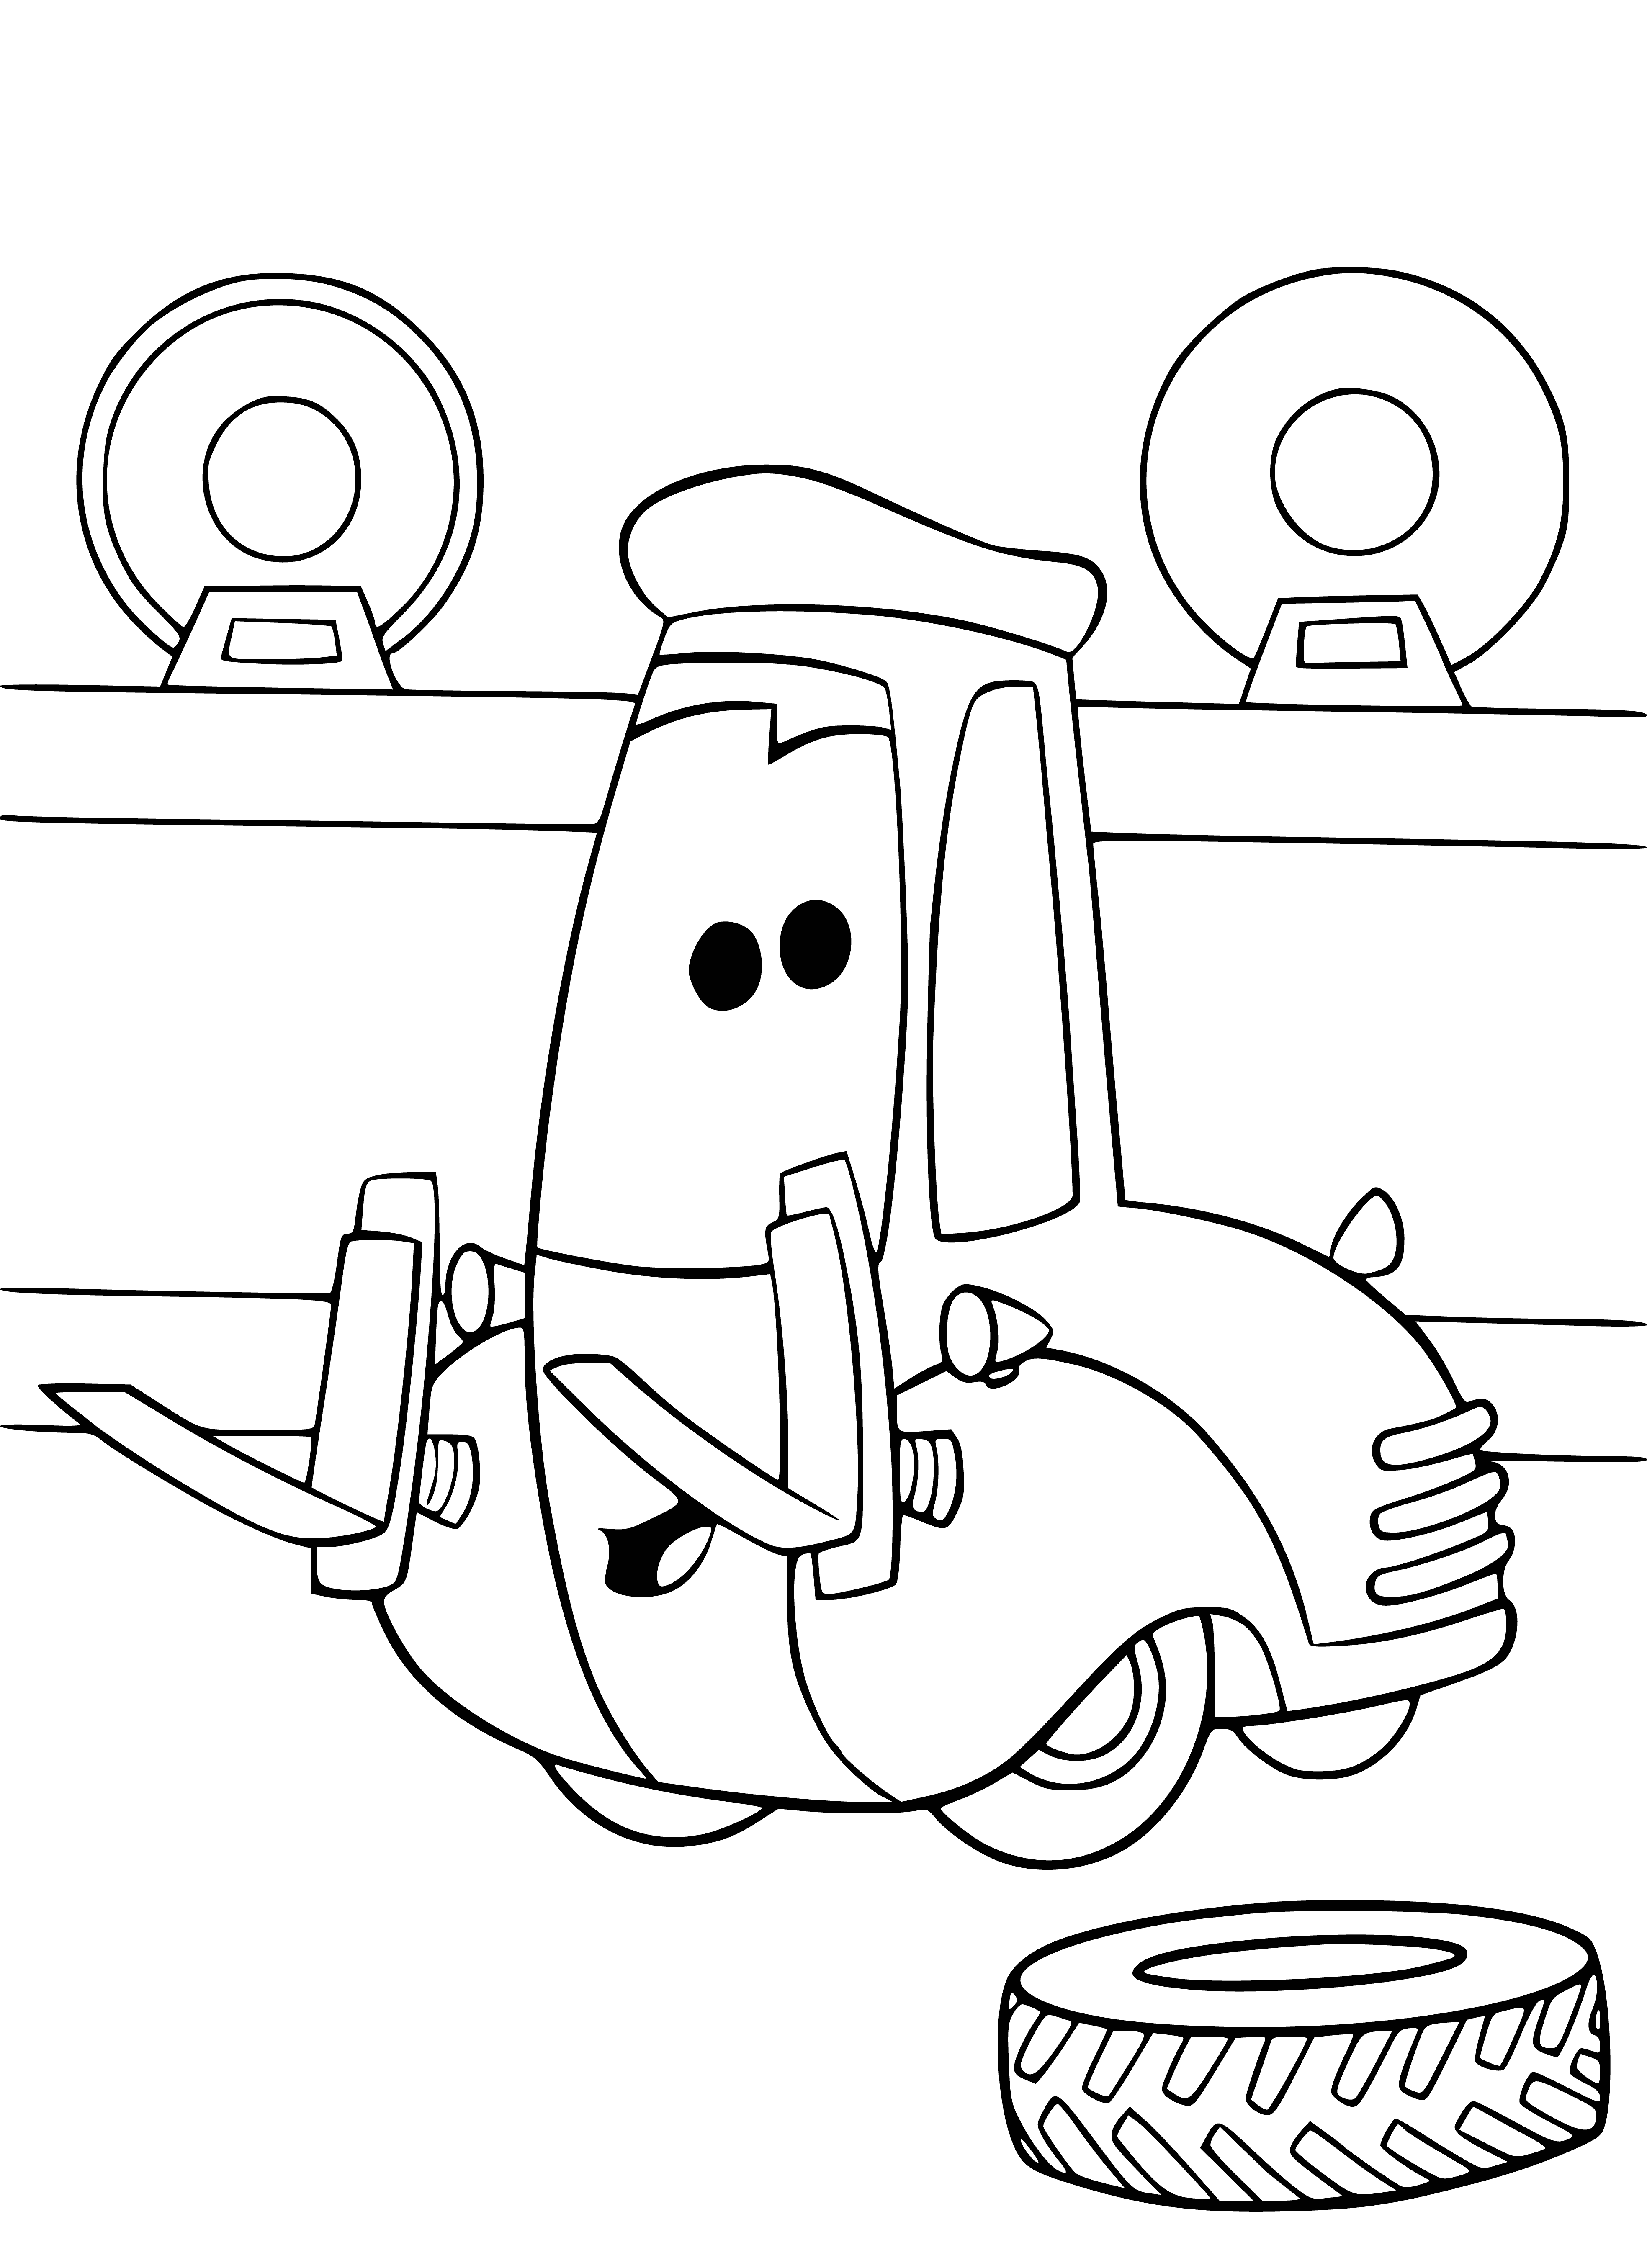 coloring page: McQueen and his four car friends - each with their own personalities - form an unlikely bond, finding strength in their differences.